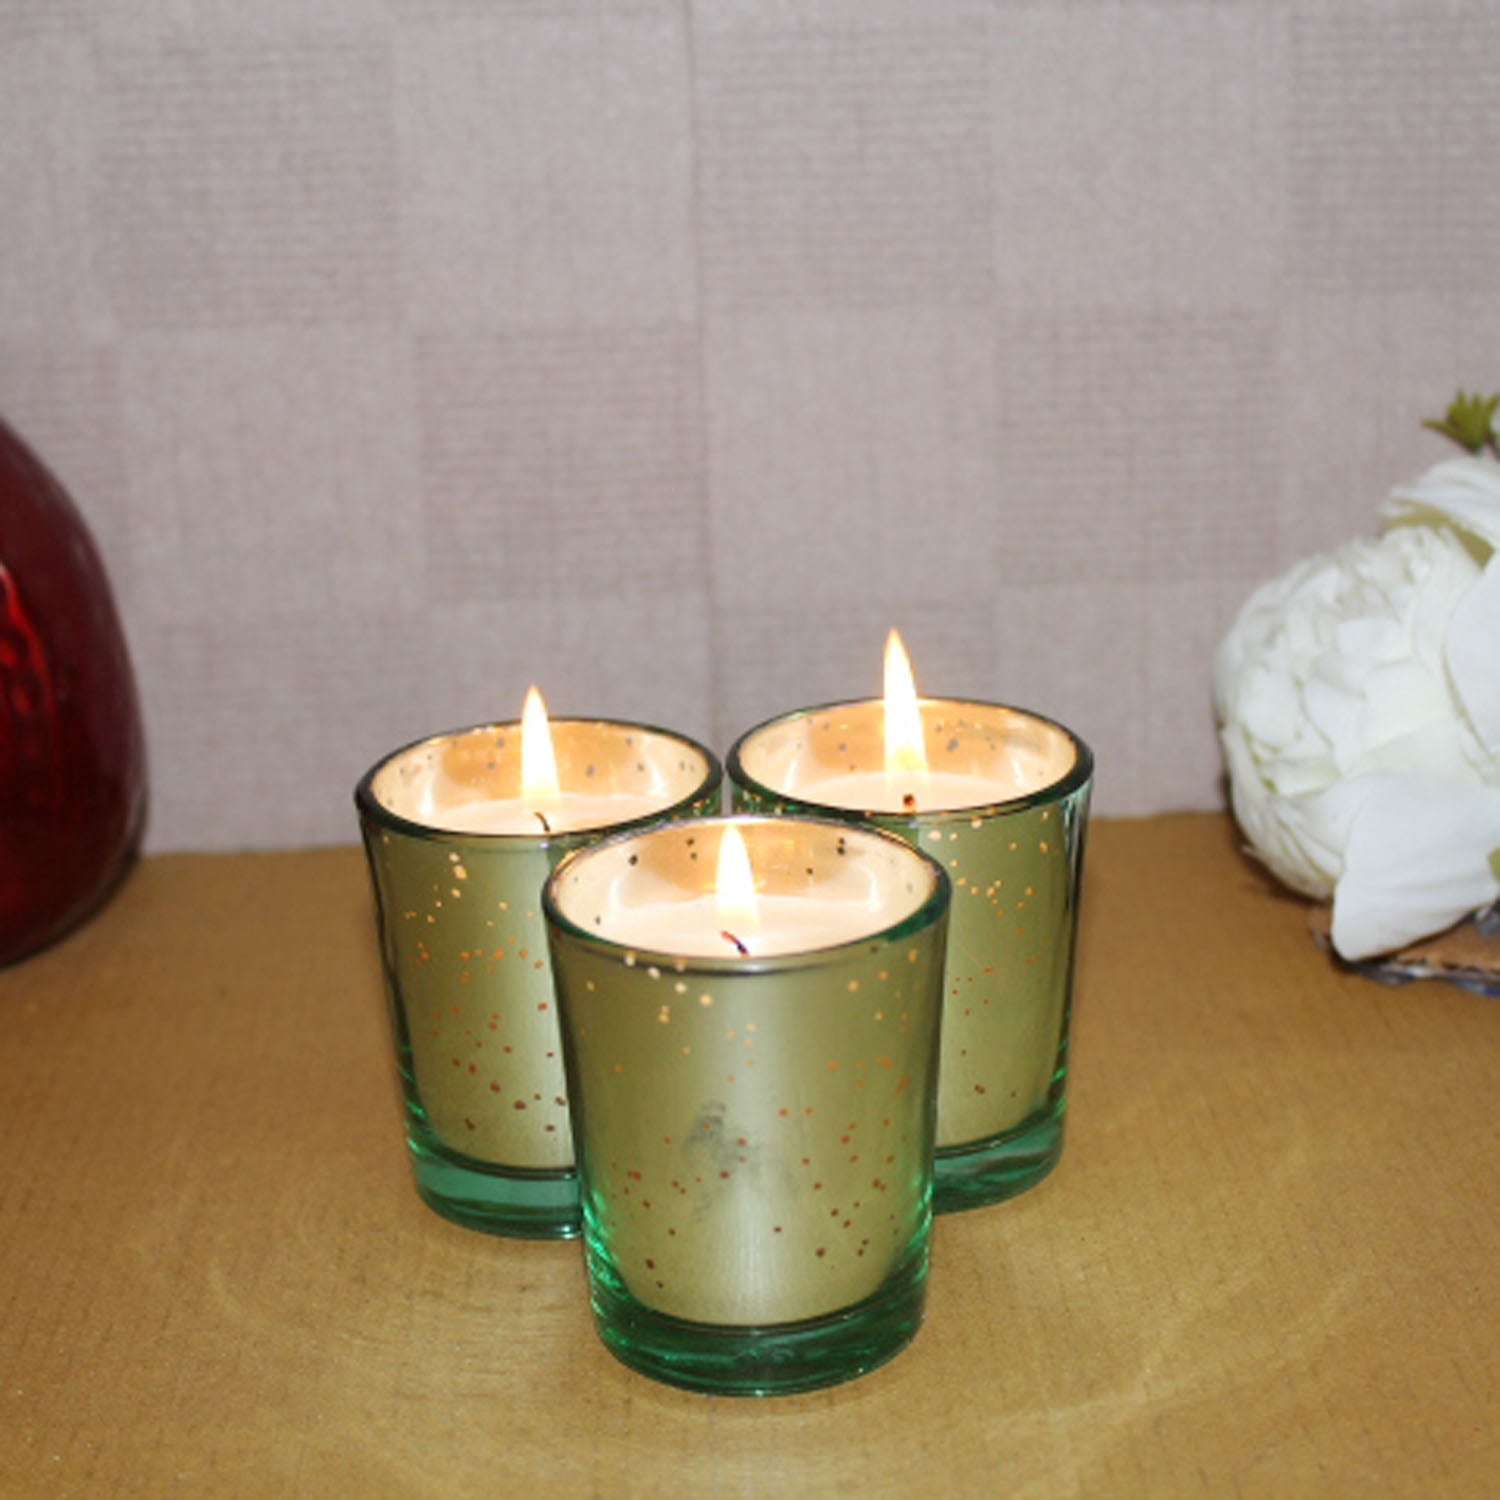 Hosley Set of 3 Sweet Pea Jasmine Fragrance Metallic Green  Glass Candle / Candles for Home Decoration